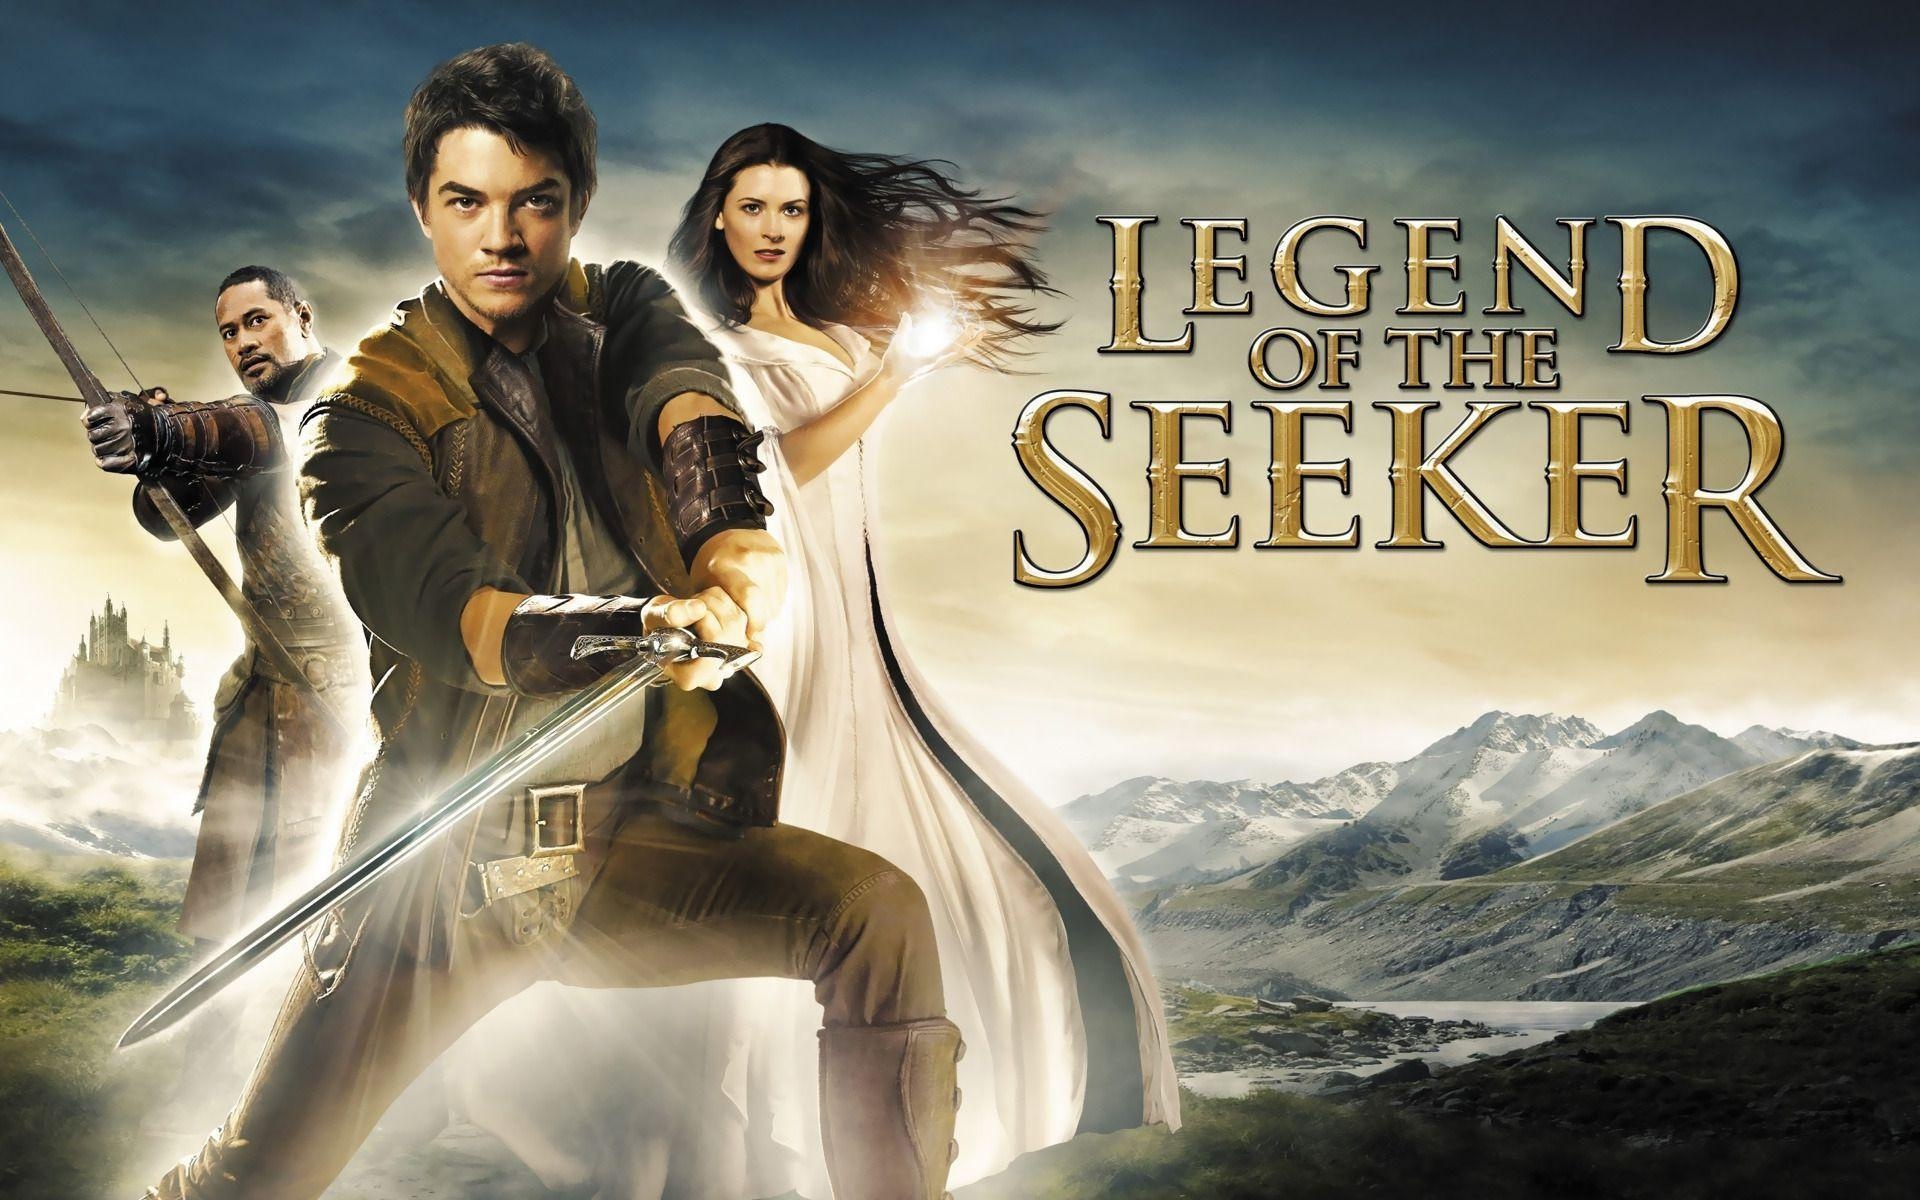 Legend of the Seeker (TV Series): An American television show created by Sam Raimi, ABC Studios production. 1920x1200 HD Wallpaper.